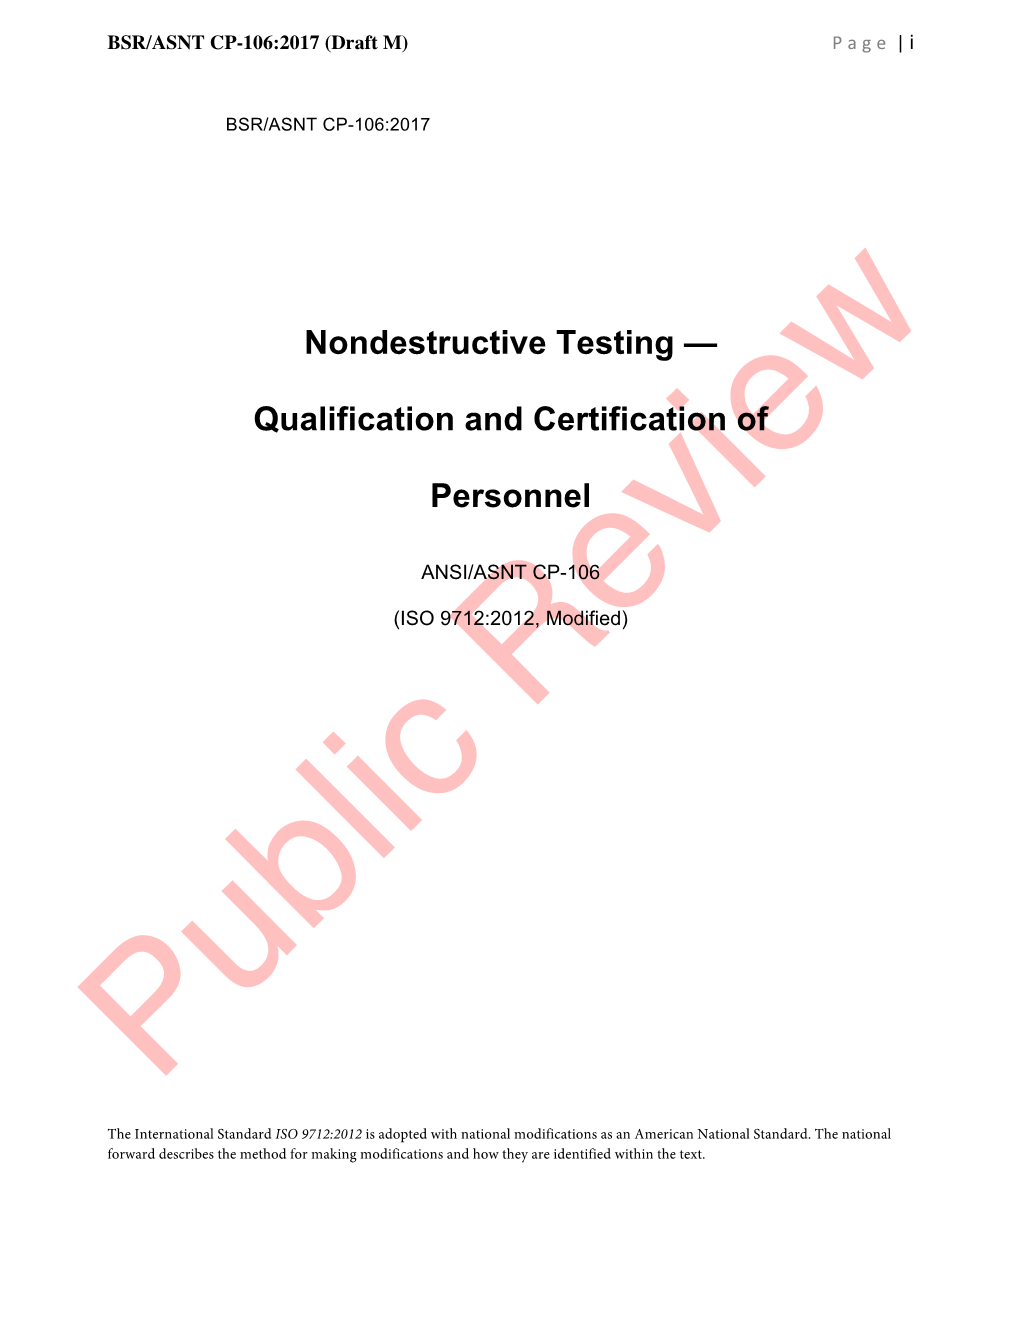 Nondestructive Testing — Qualification and Certification Of